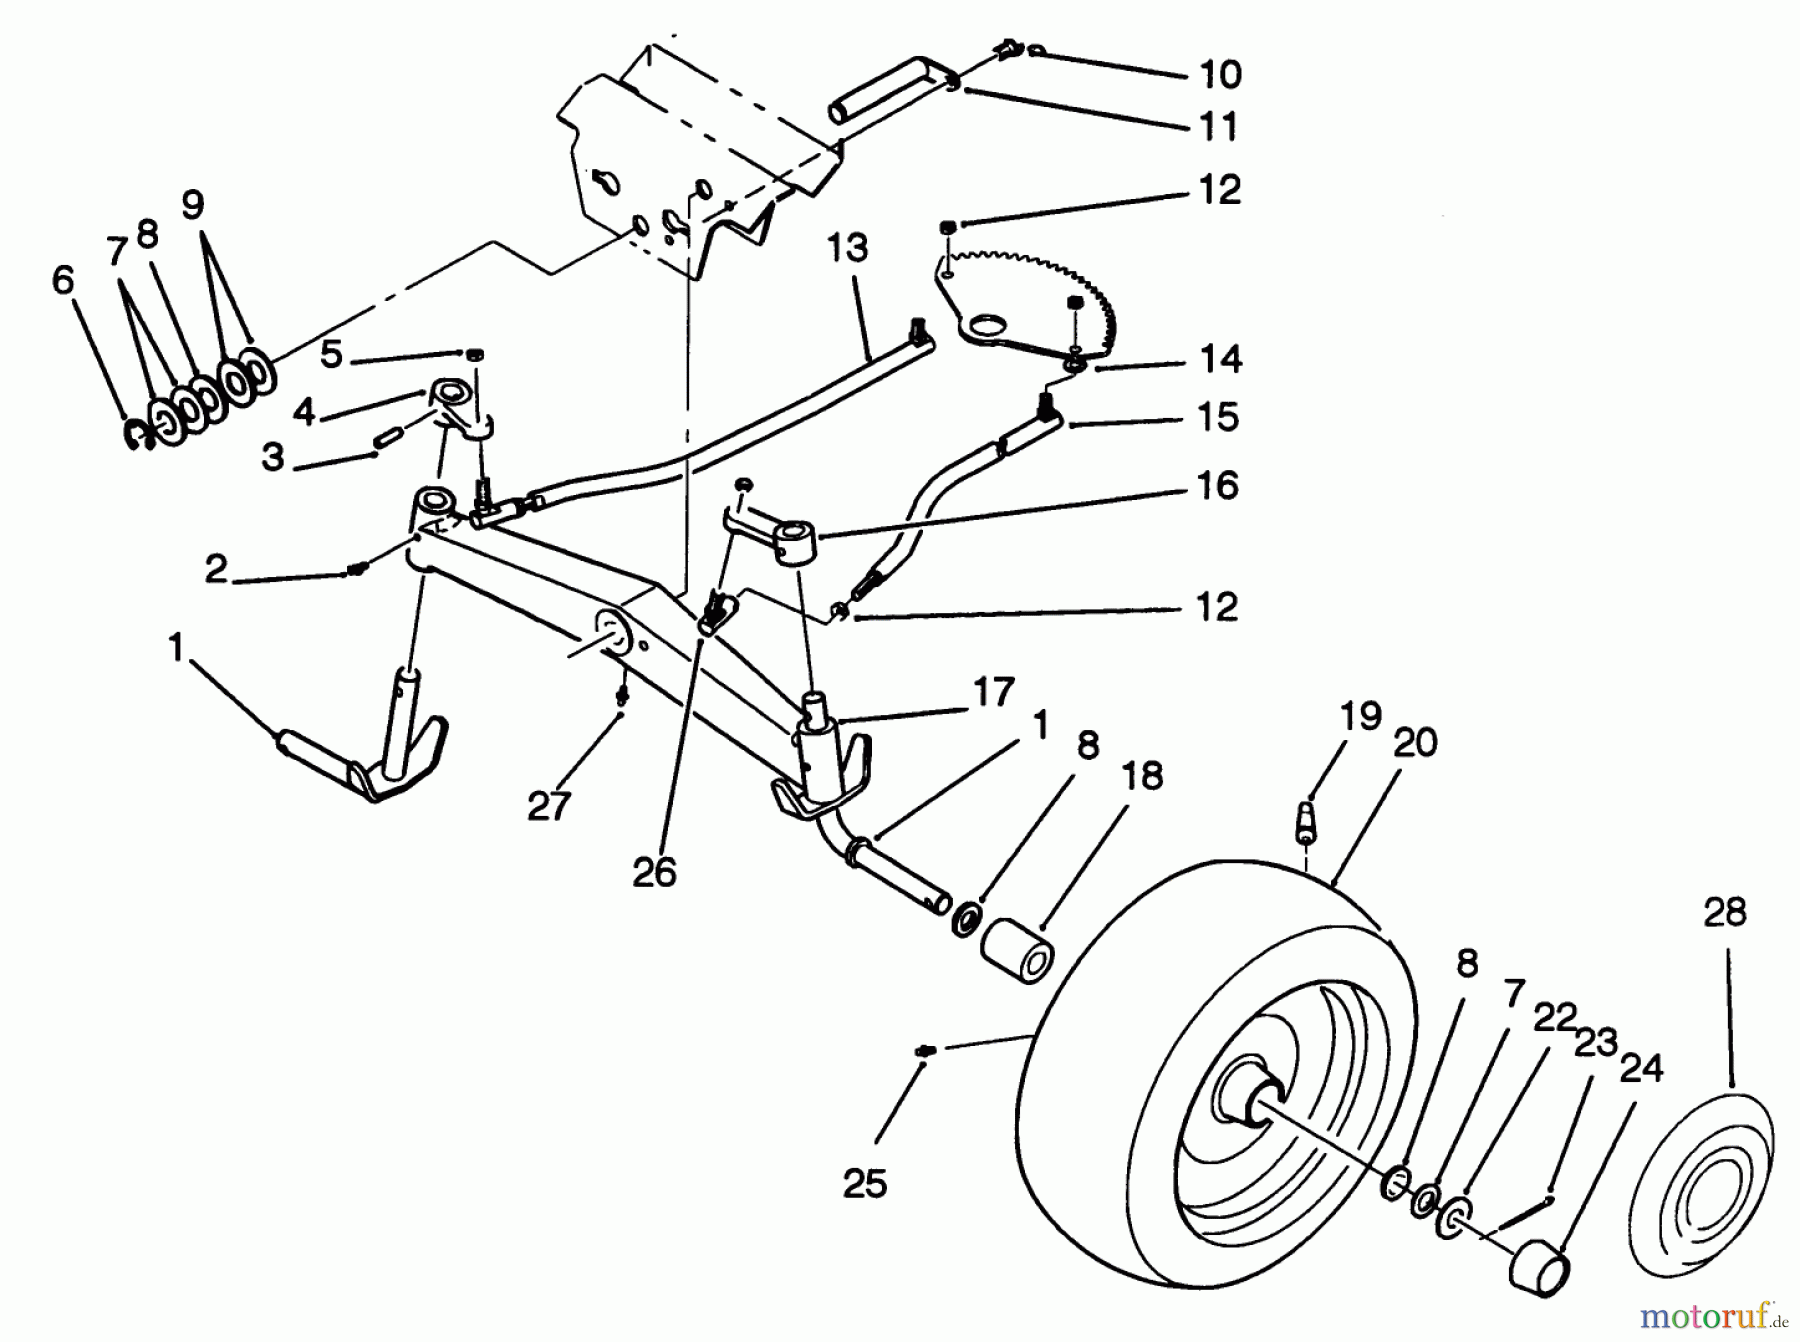  Toro Neu Mowers, Lawn & Garden Tractor Seite 2 R2-16BE01 (246-H) - Toro 246-H Yard Tractor, 1992 (2000001-2999999) FRONT AXLE ASSEMBLY